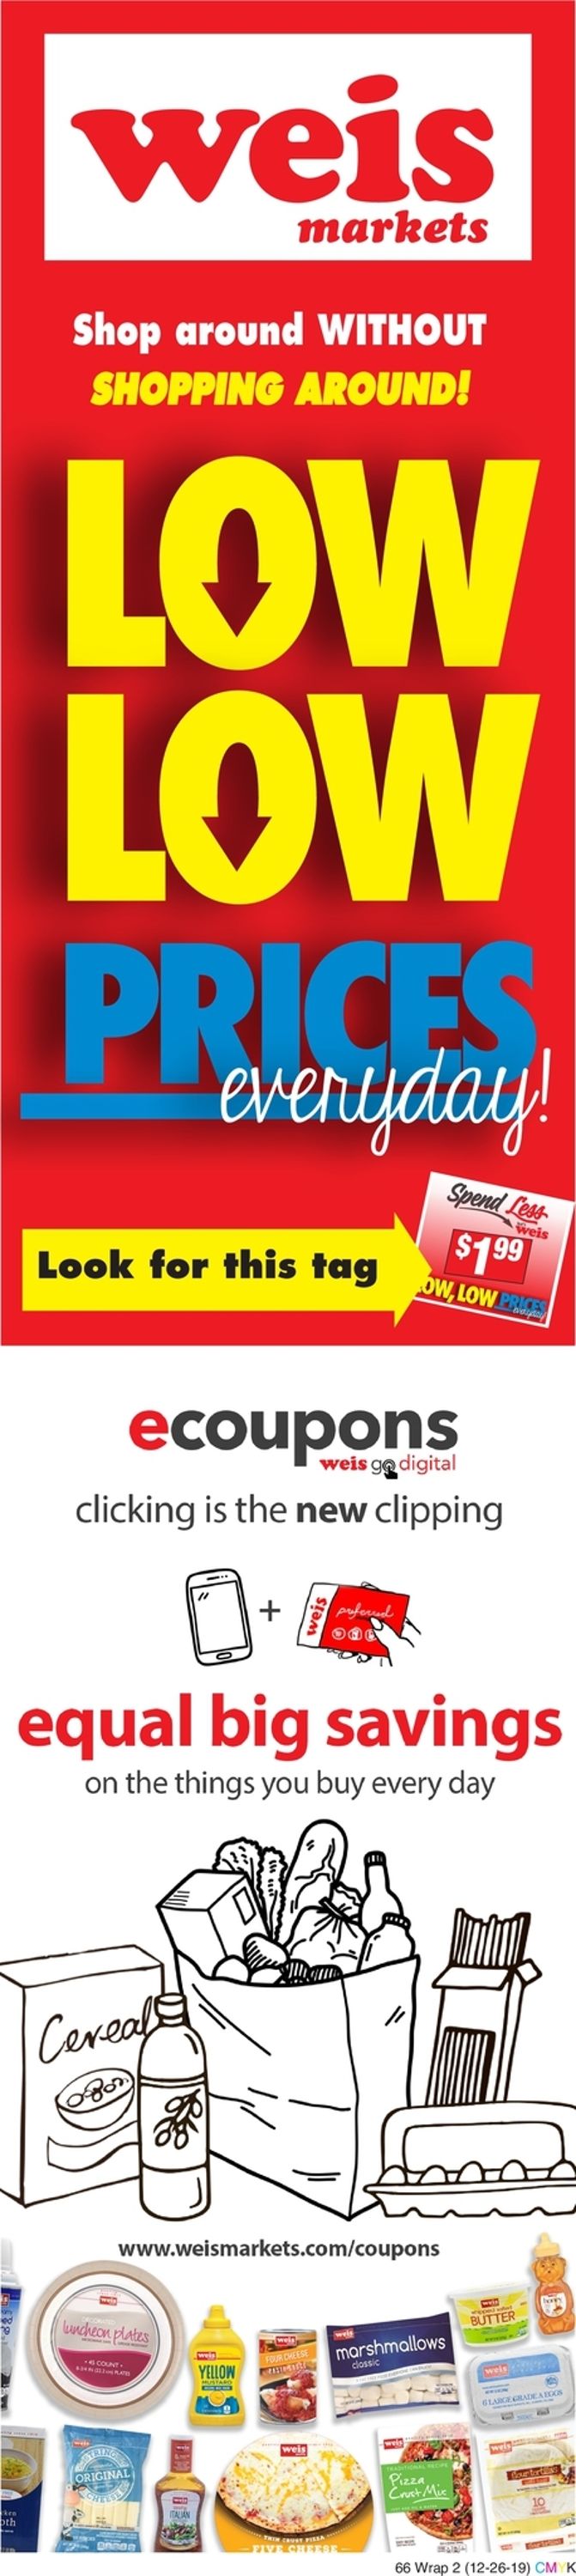 Weis - New Year's Ad 2019/2020 Weekly Ad Circular - valid 12/26-01/02/2020 (Page 8)